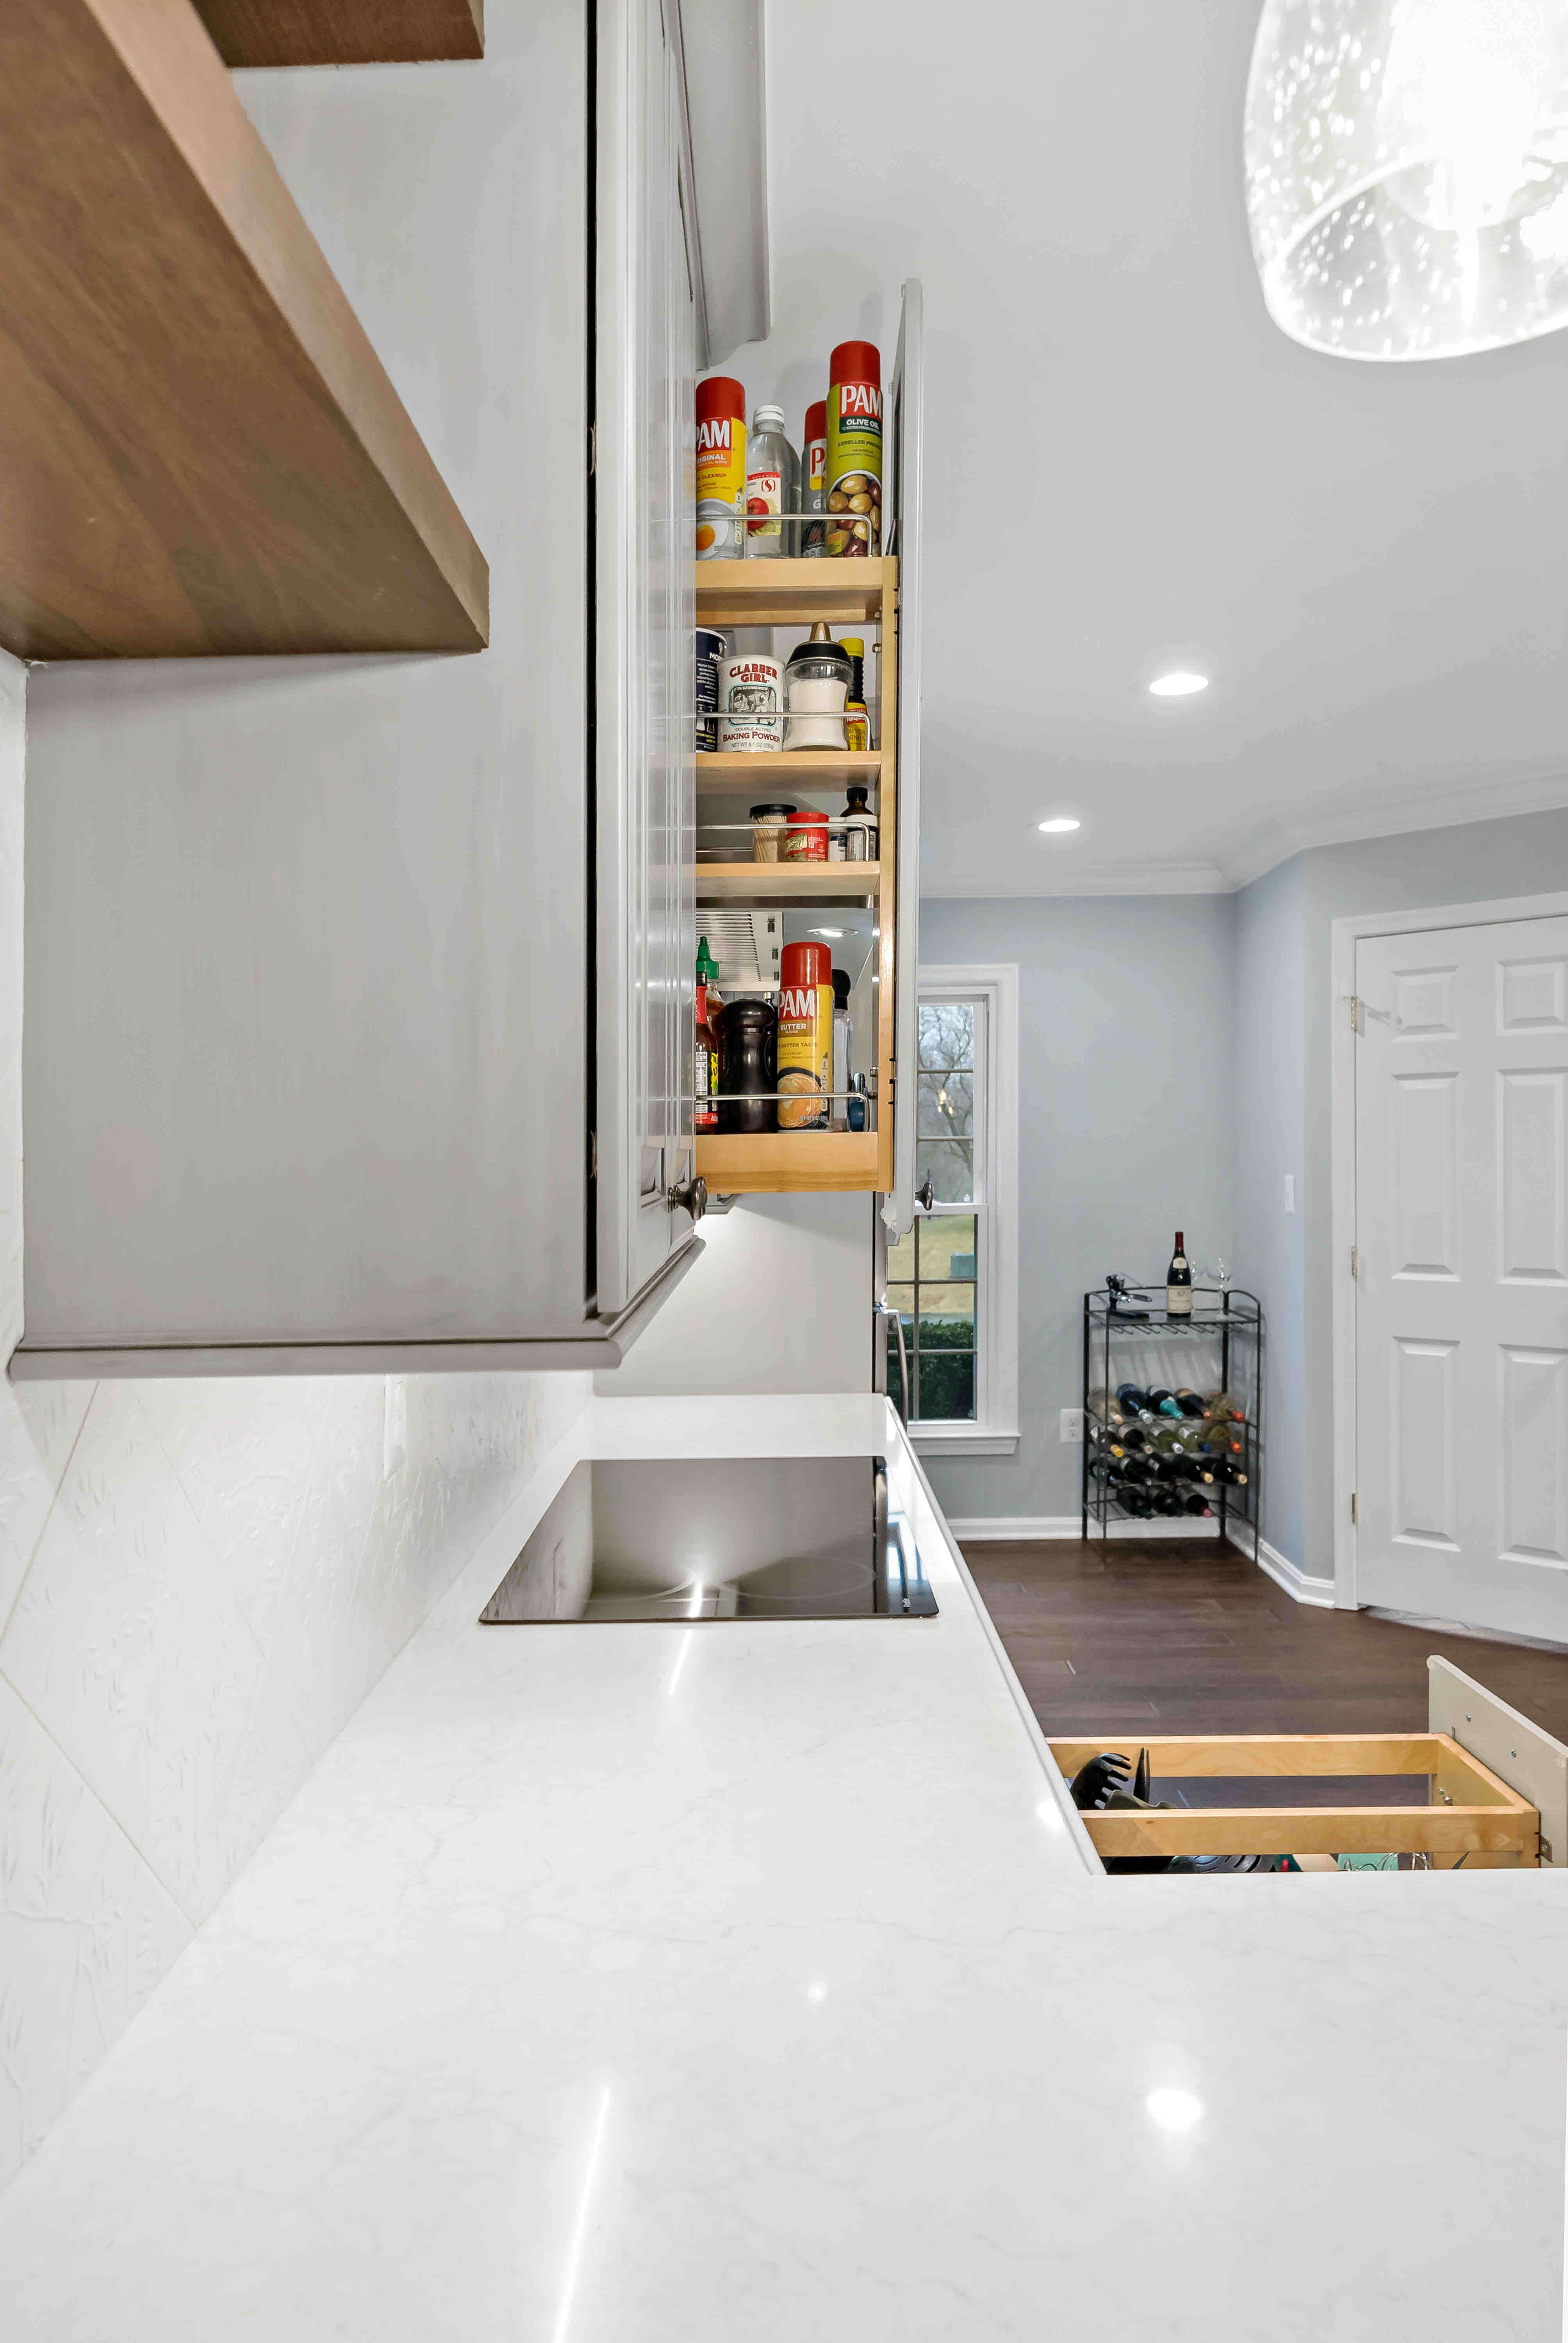 White countertops with custom cabinetry pull-out cabinets for organization